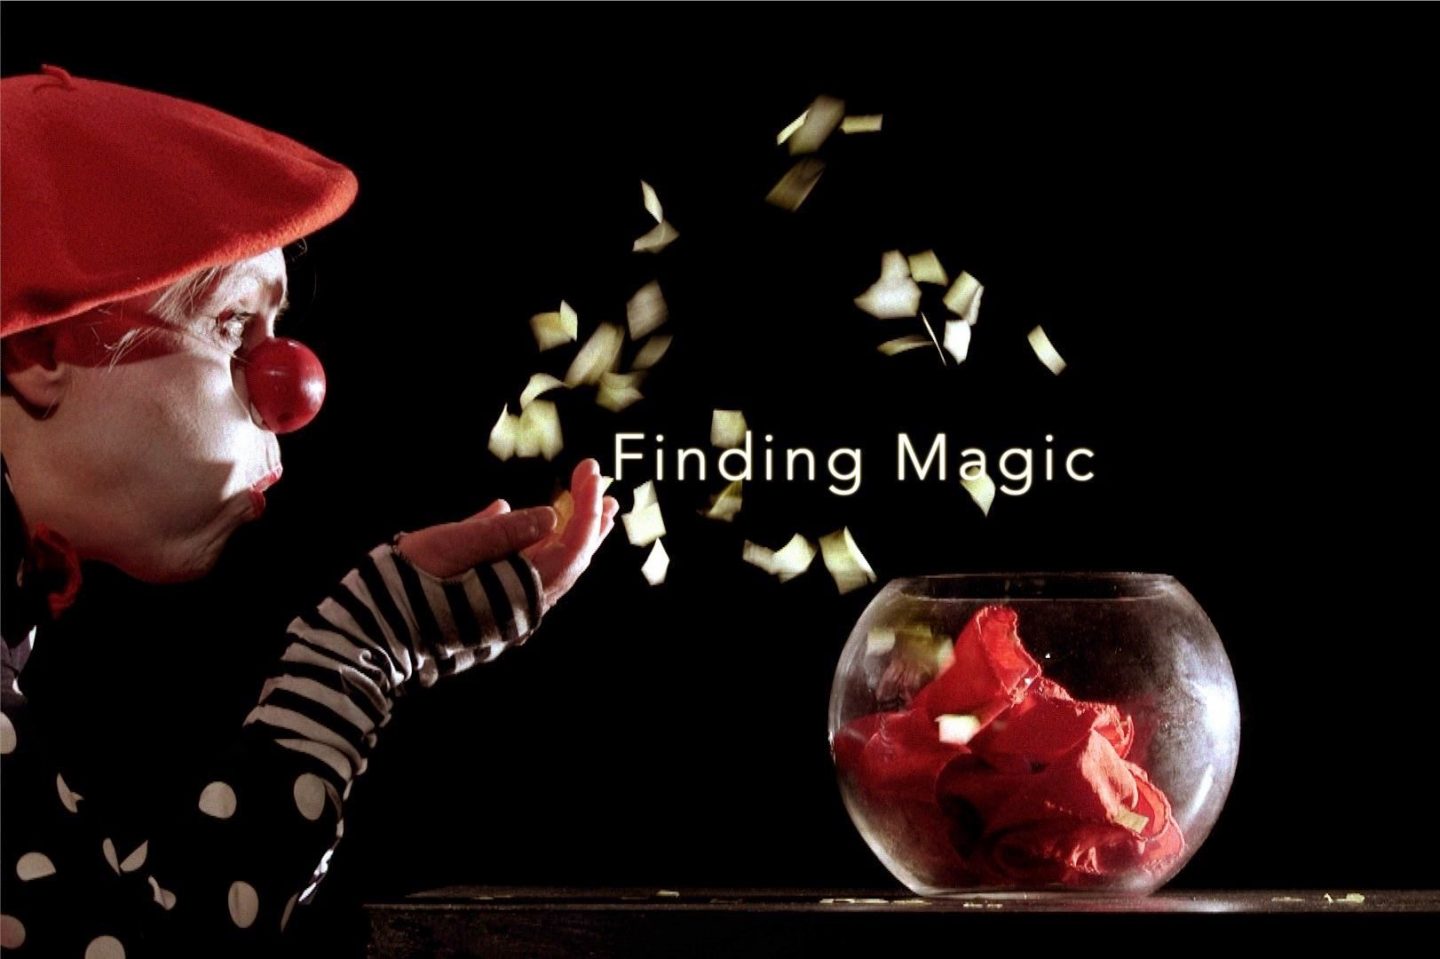 Finding Magic - Magical theatre at Norwich Puppet Theatre